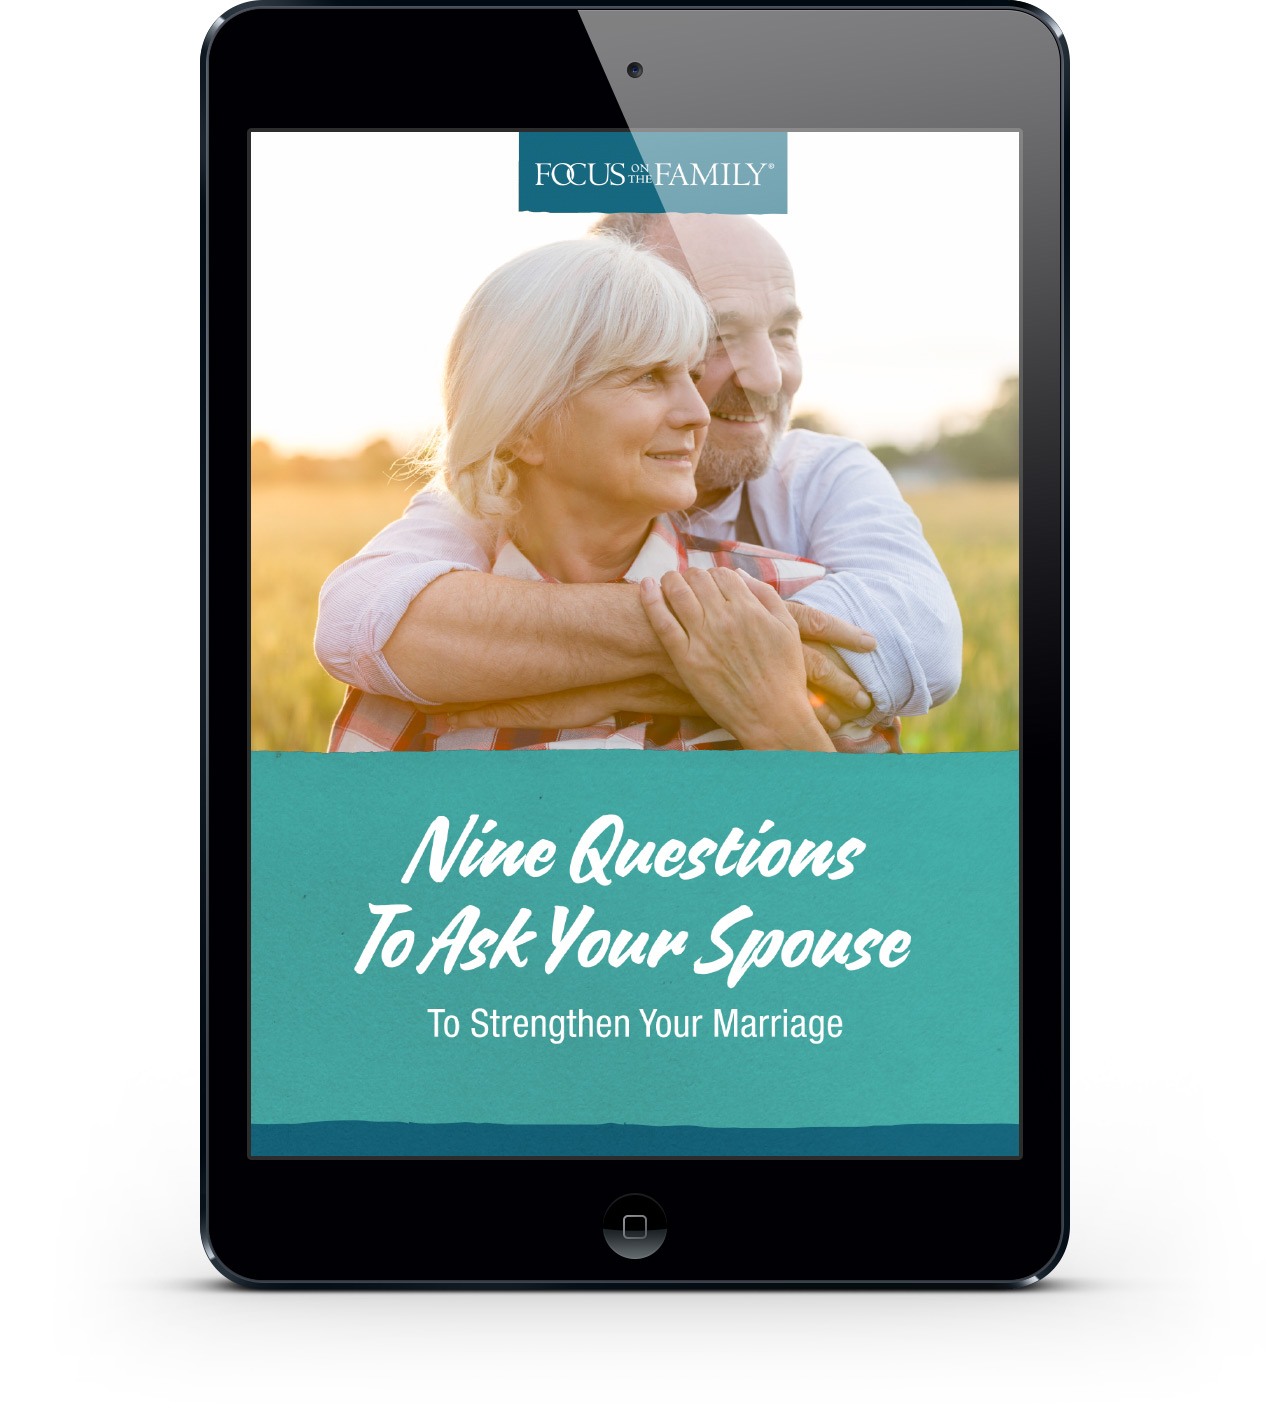 STRENGTHEN YOUR MARRIAGE